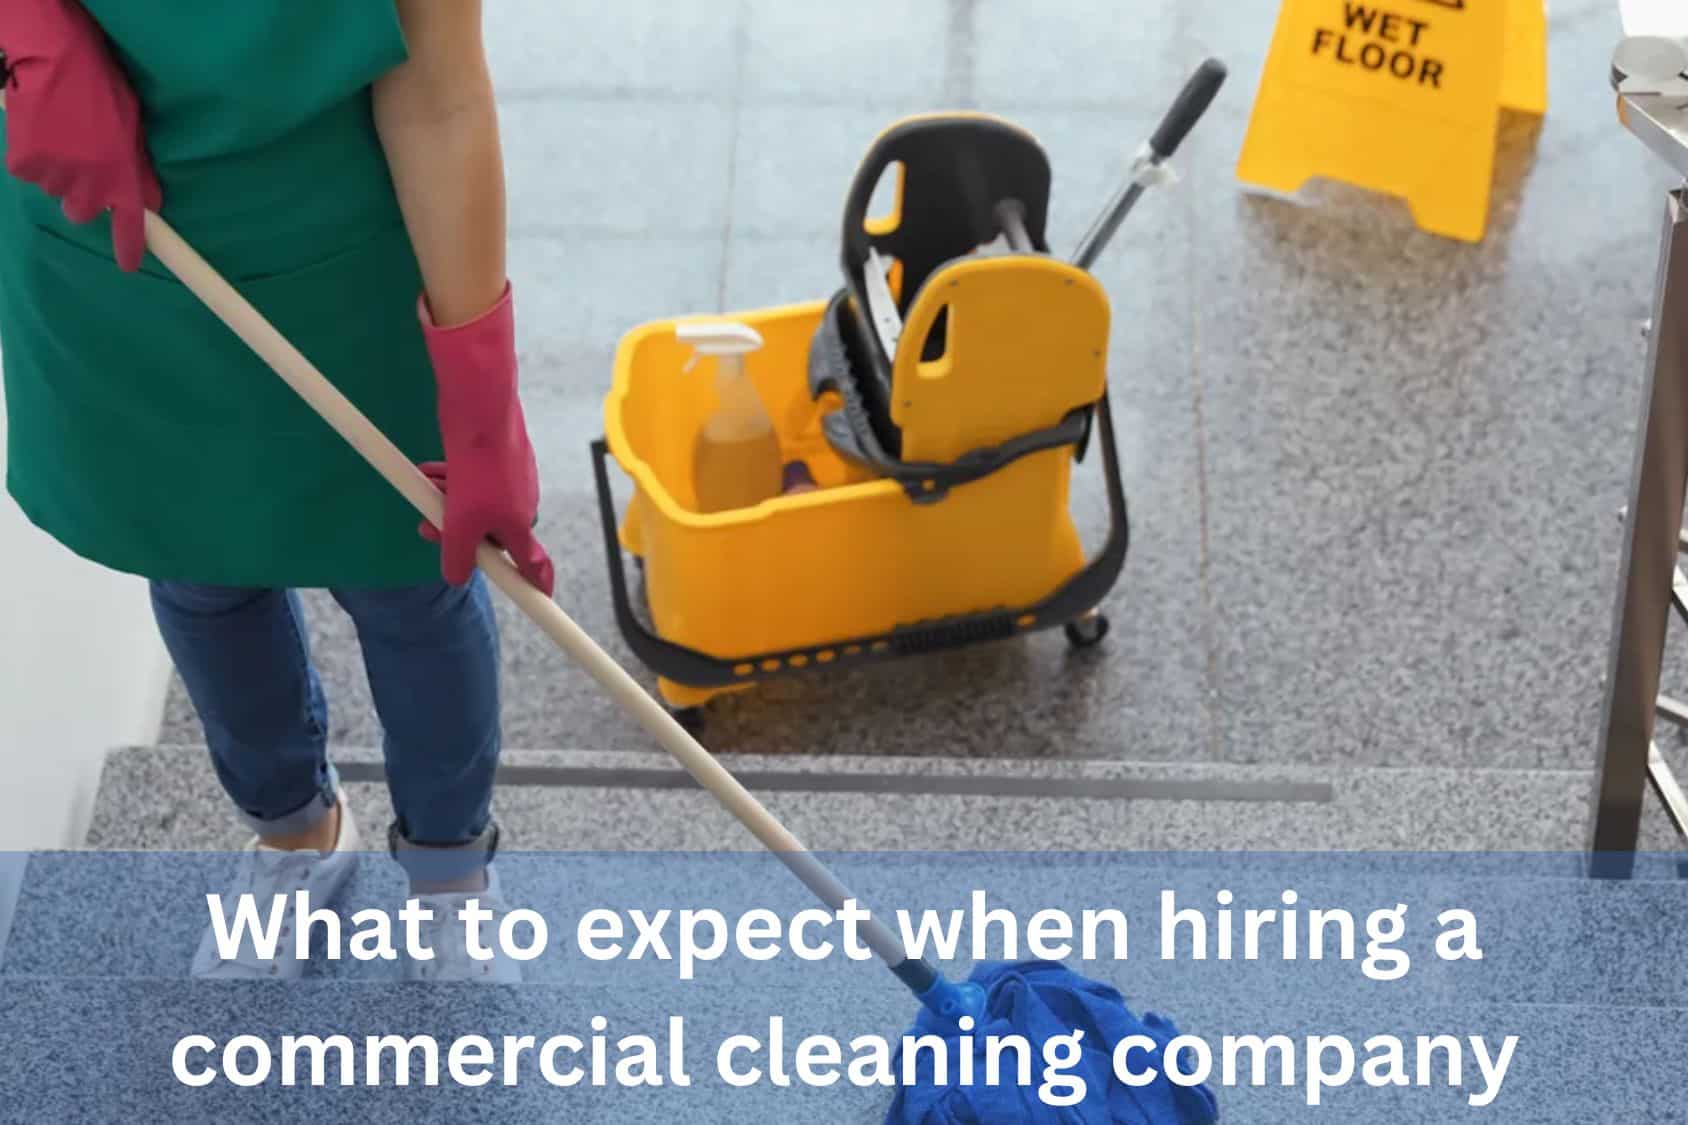 What to expect when hiring a commercial cleaning company